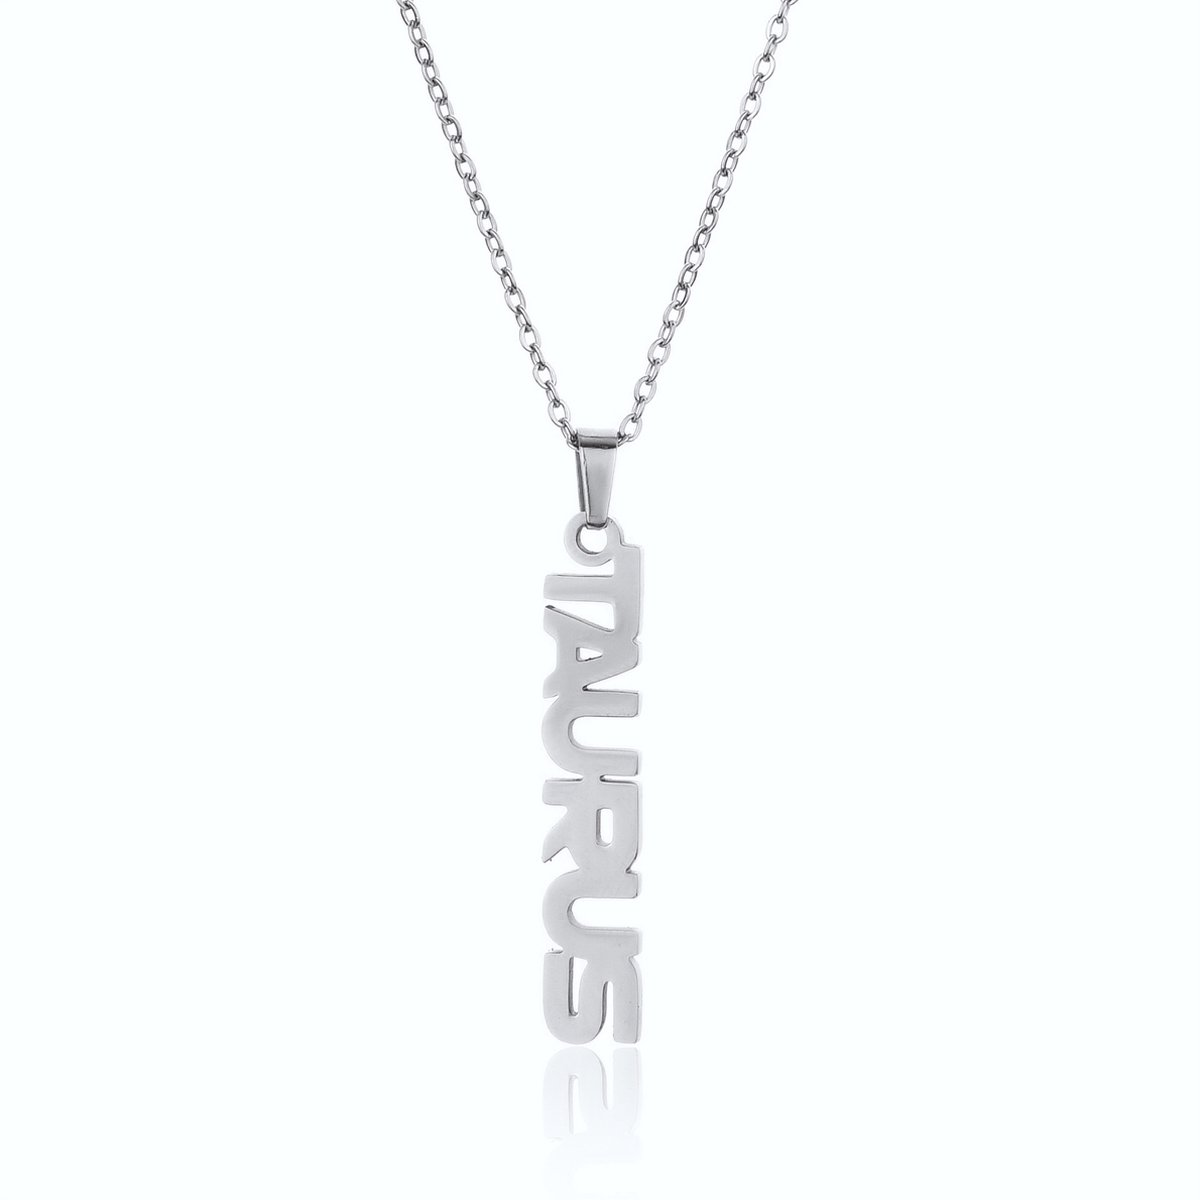 ICYBOY 18K Roestvrije Stalen Ketting Met Zodiac Sterrenbeeld Letters Pendant [Stier] [45 cm] Silver Plating Stainless Steel Letter Necklace Vertical Horoscope Necklace